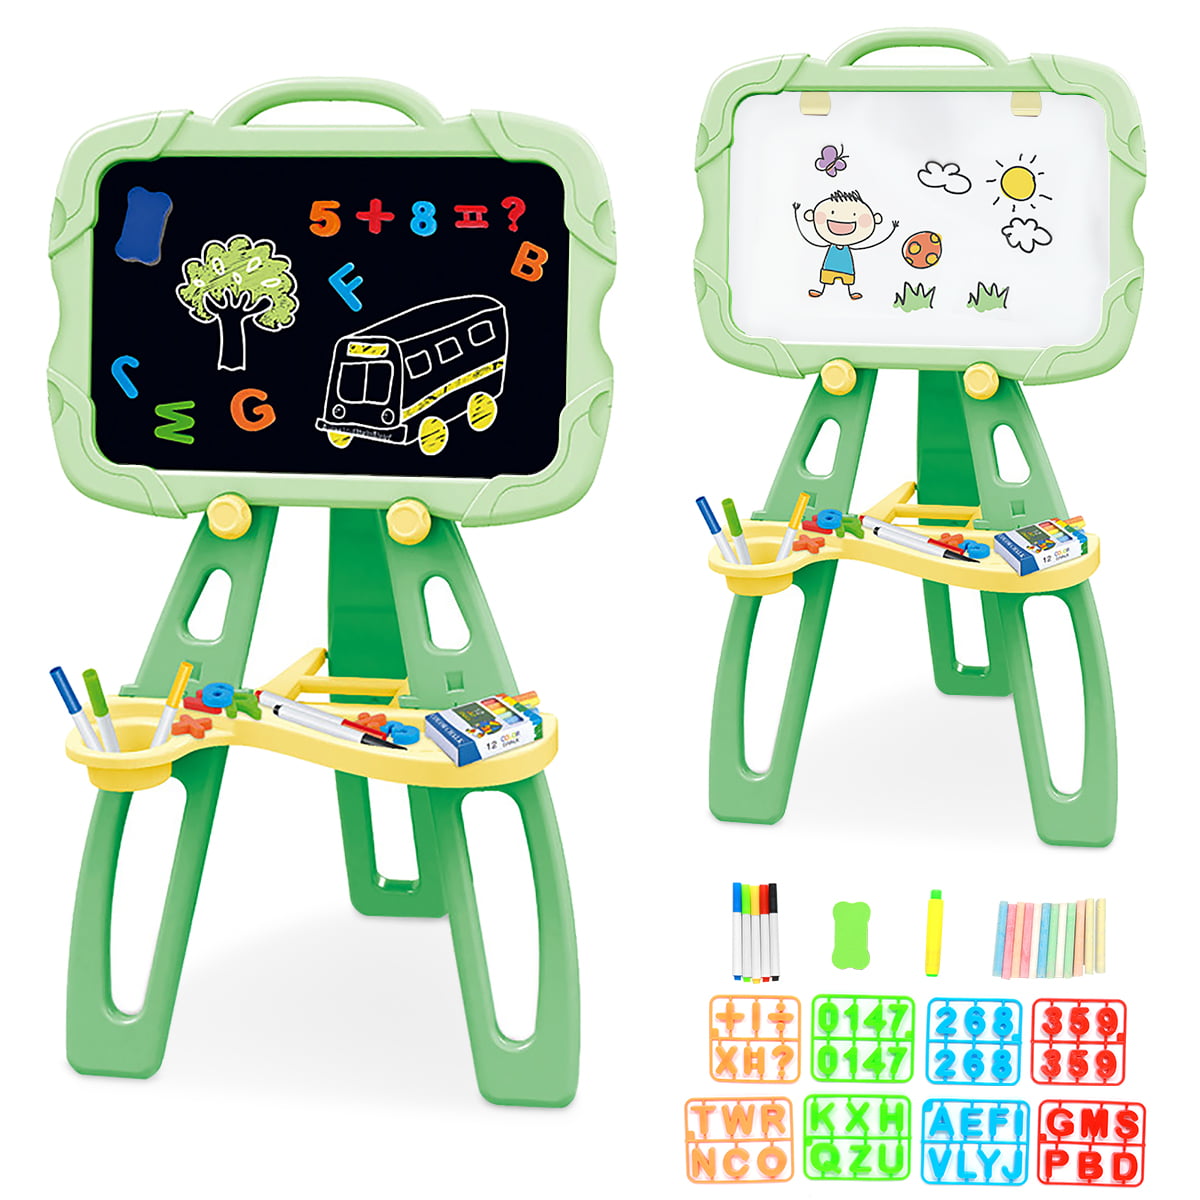 Details about   Kids Double-sided Magnetic Standing Art Easel Drawing Chalkboard Whiteboard US 